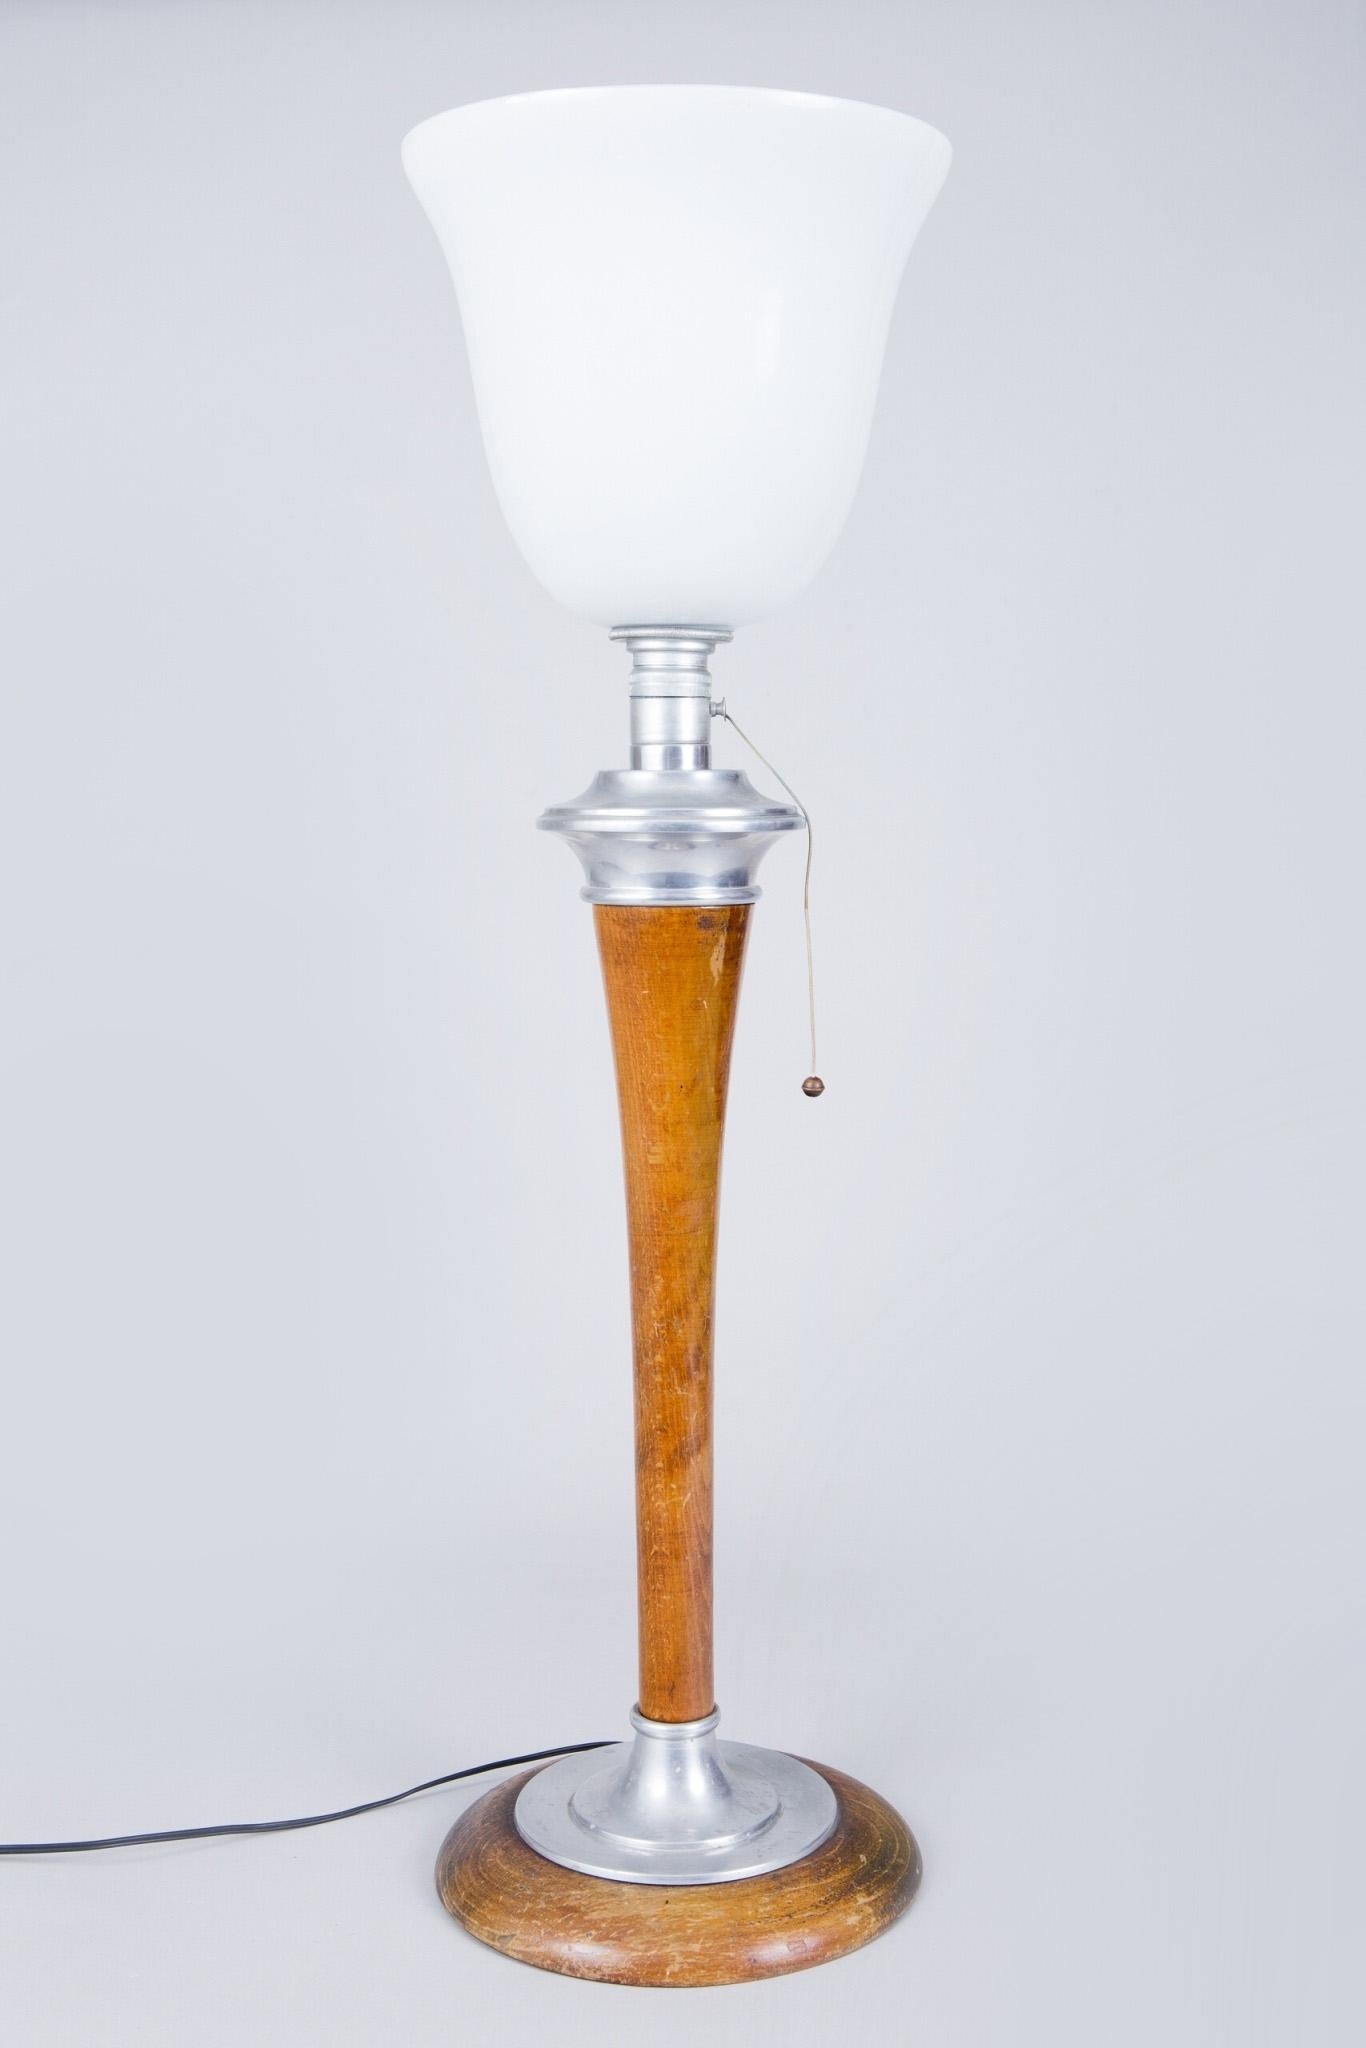 French table lamp
Made circa 1920s 
The lamp is in perfect original condition, no restoration was needed, only modern European electrification.
Made out of Beech, Aluminium and milk glass.